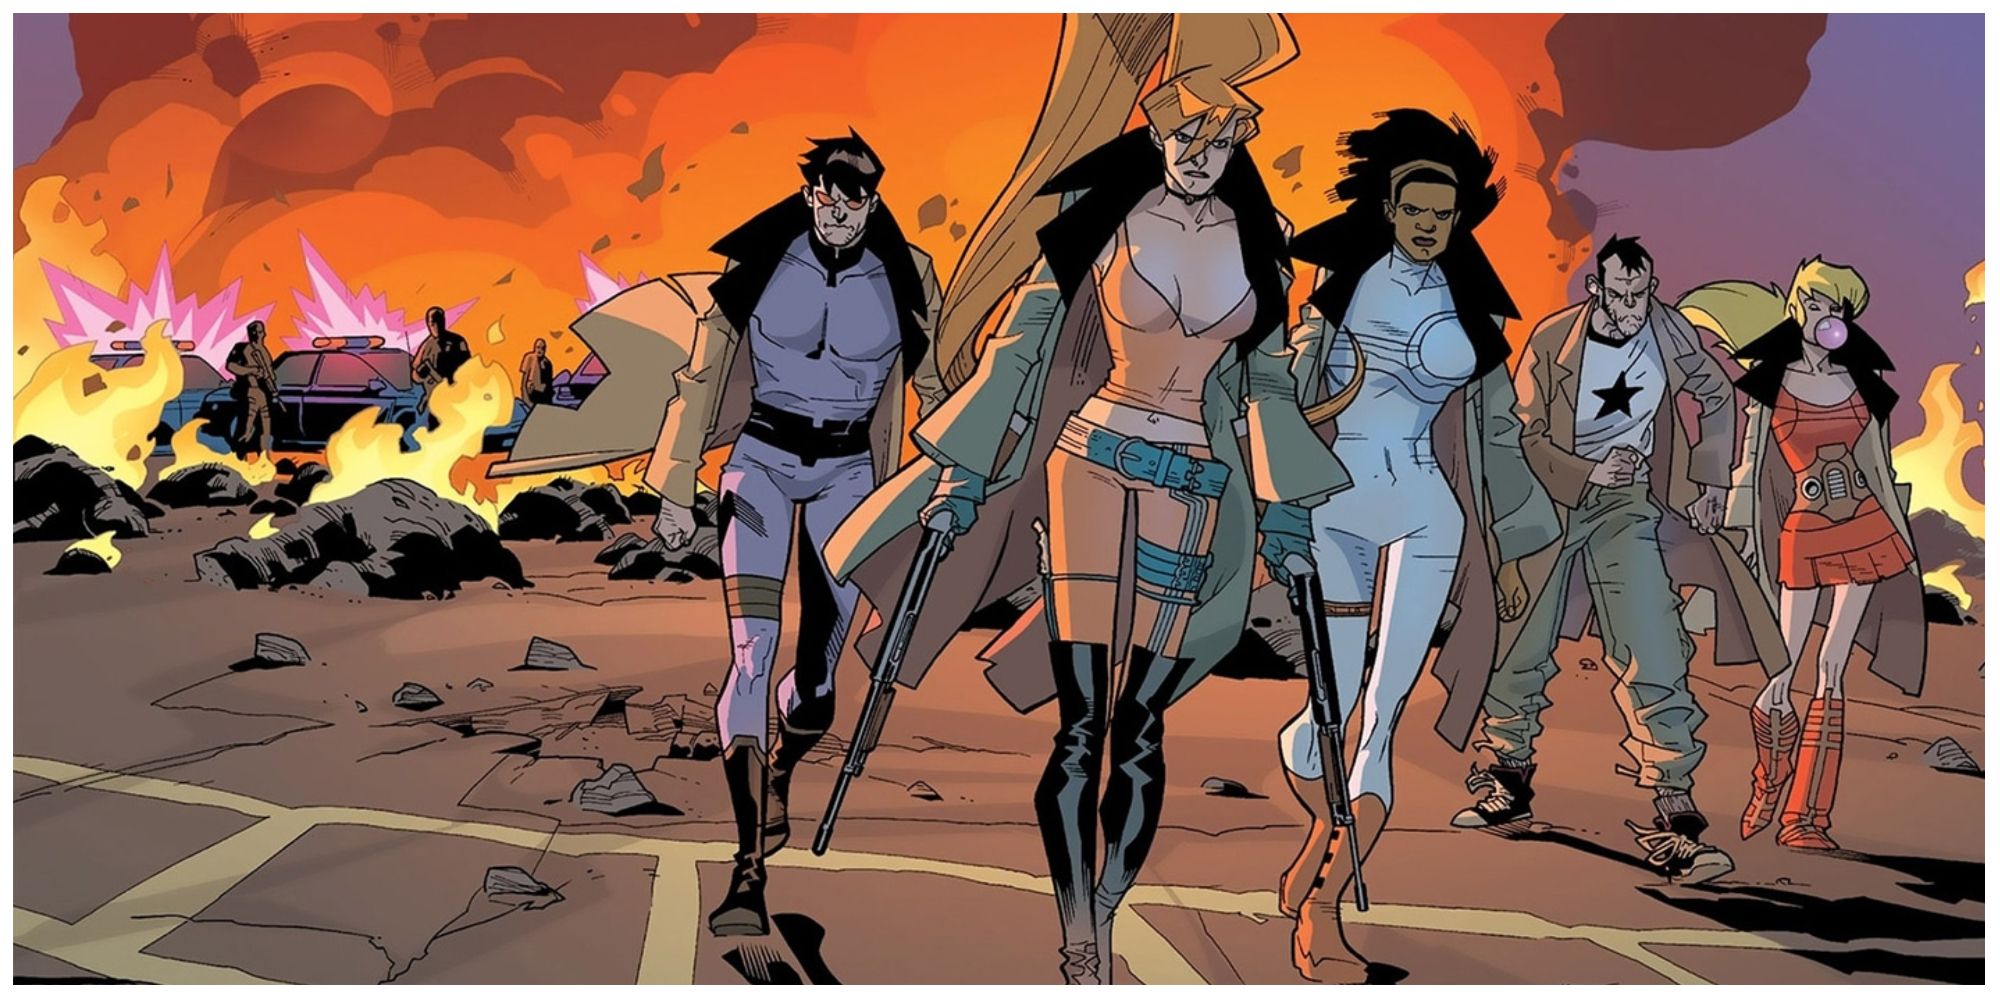 Elsa Bloodstone looking serious with her crew